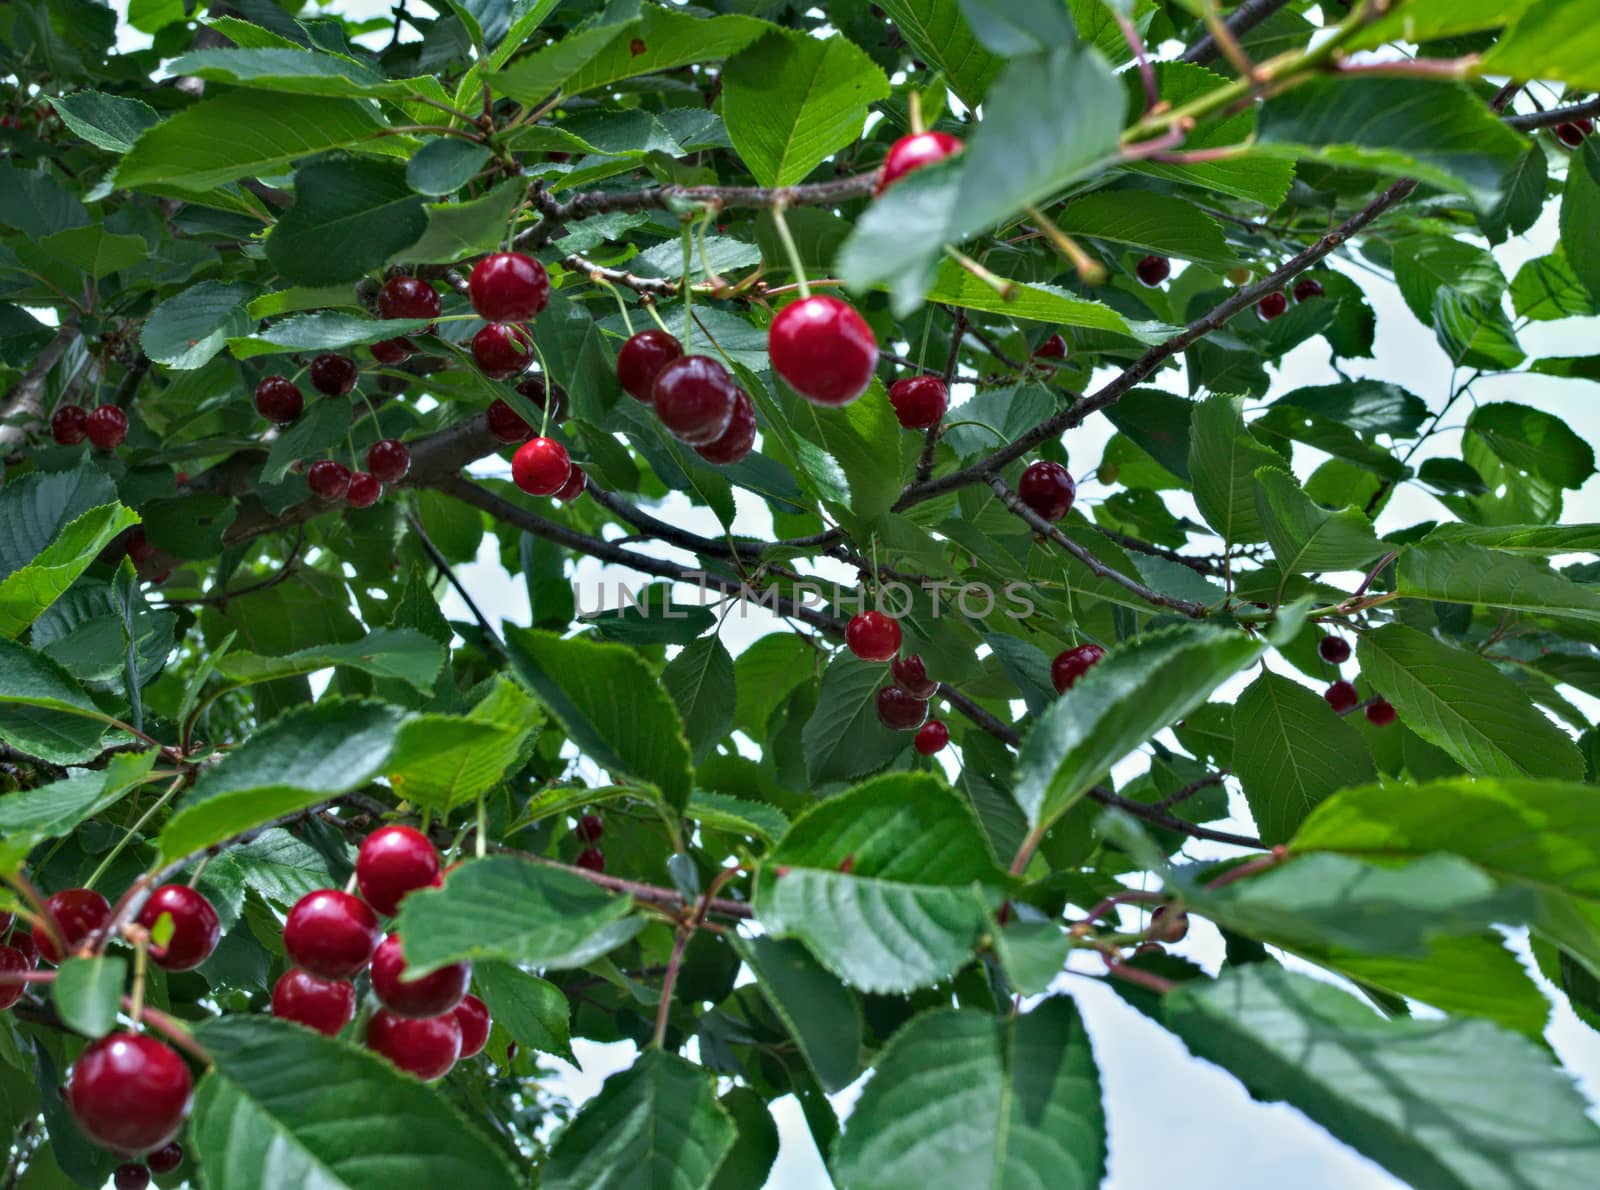 Cherries hanging from branch, ready for harvest by sheriffkule